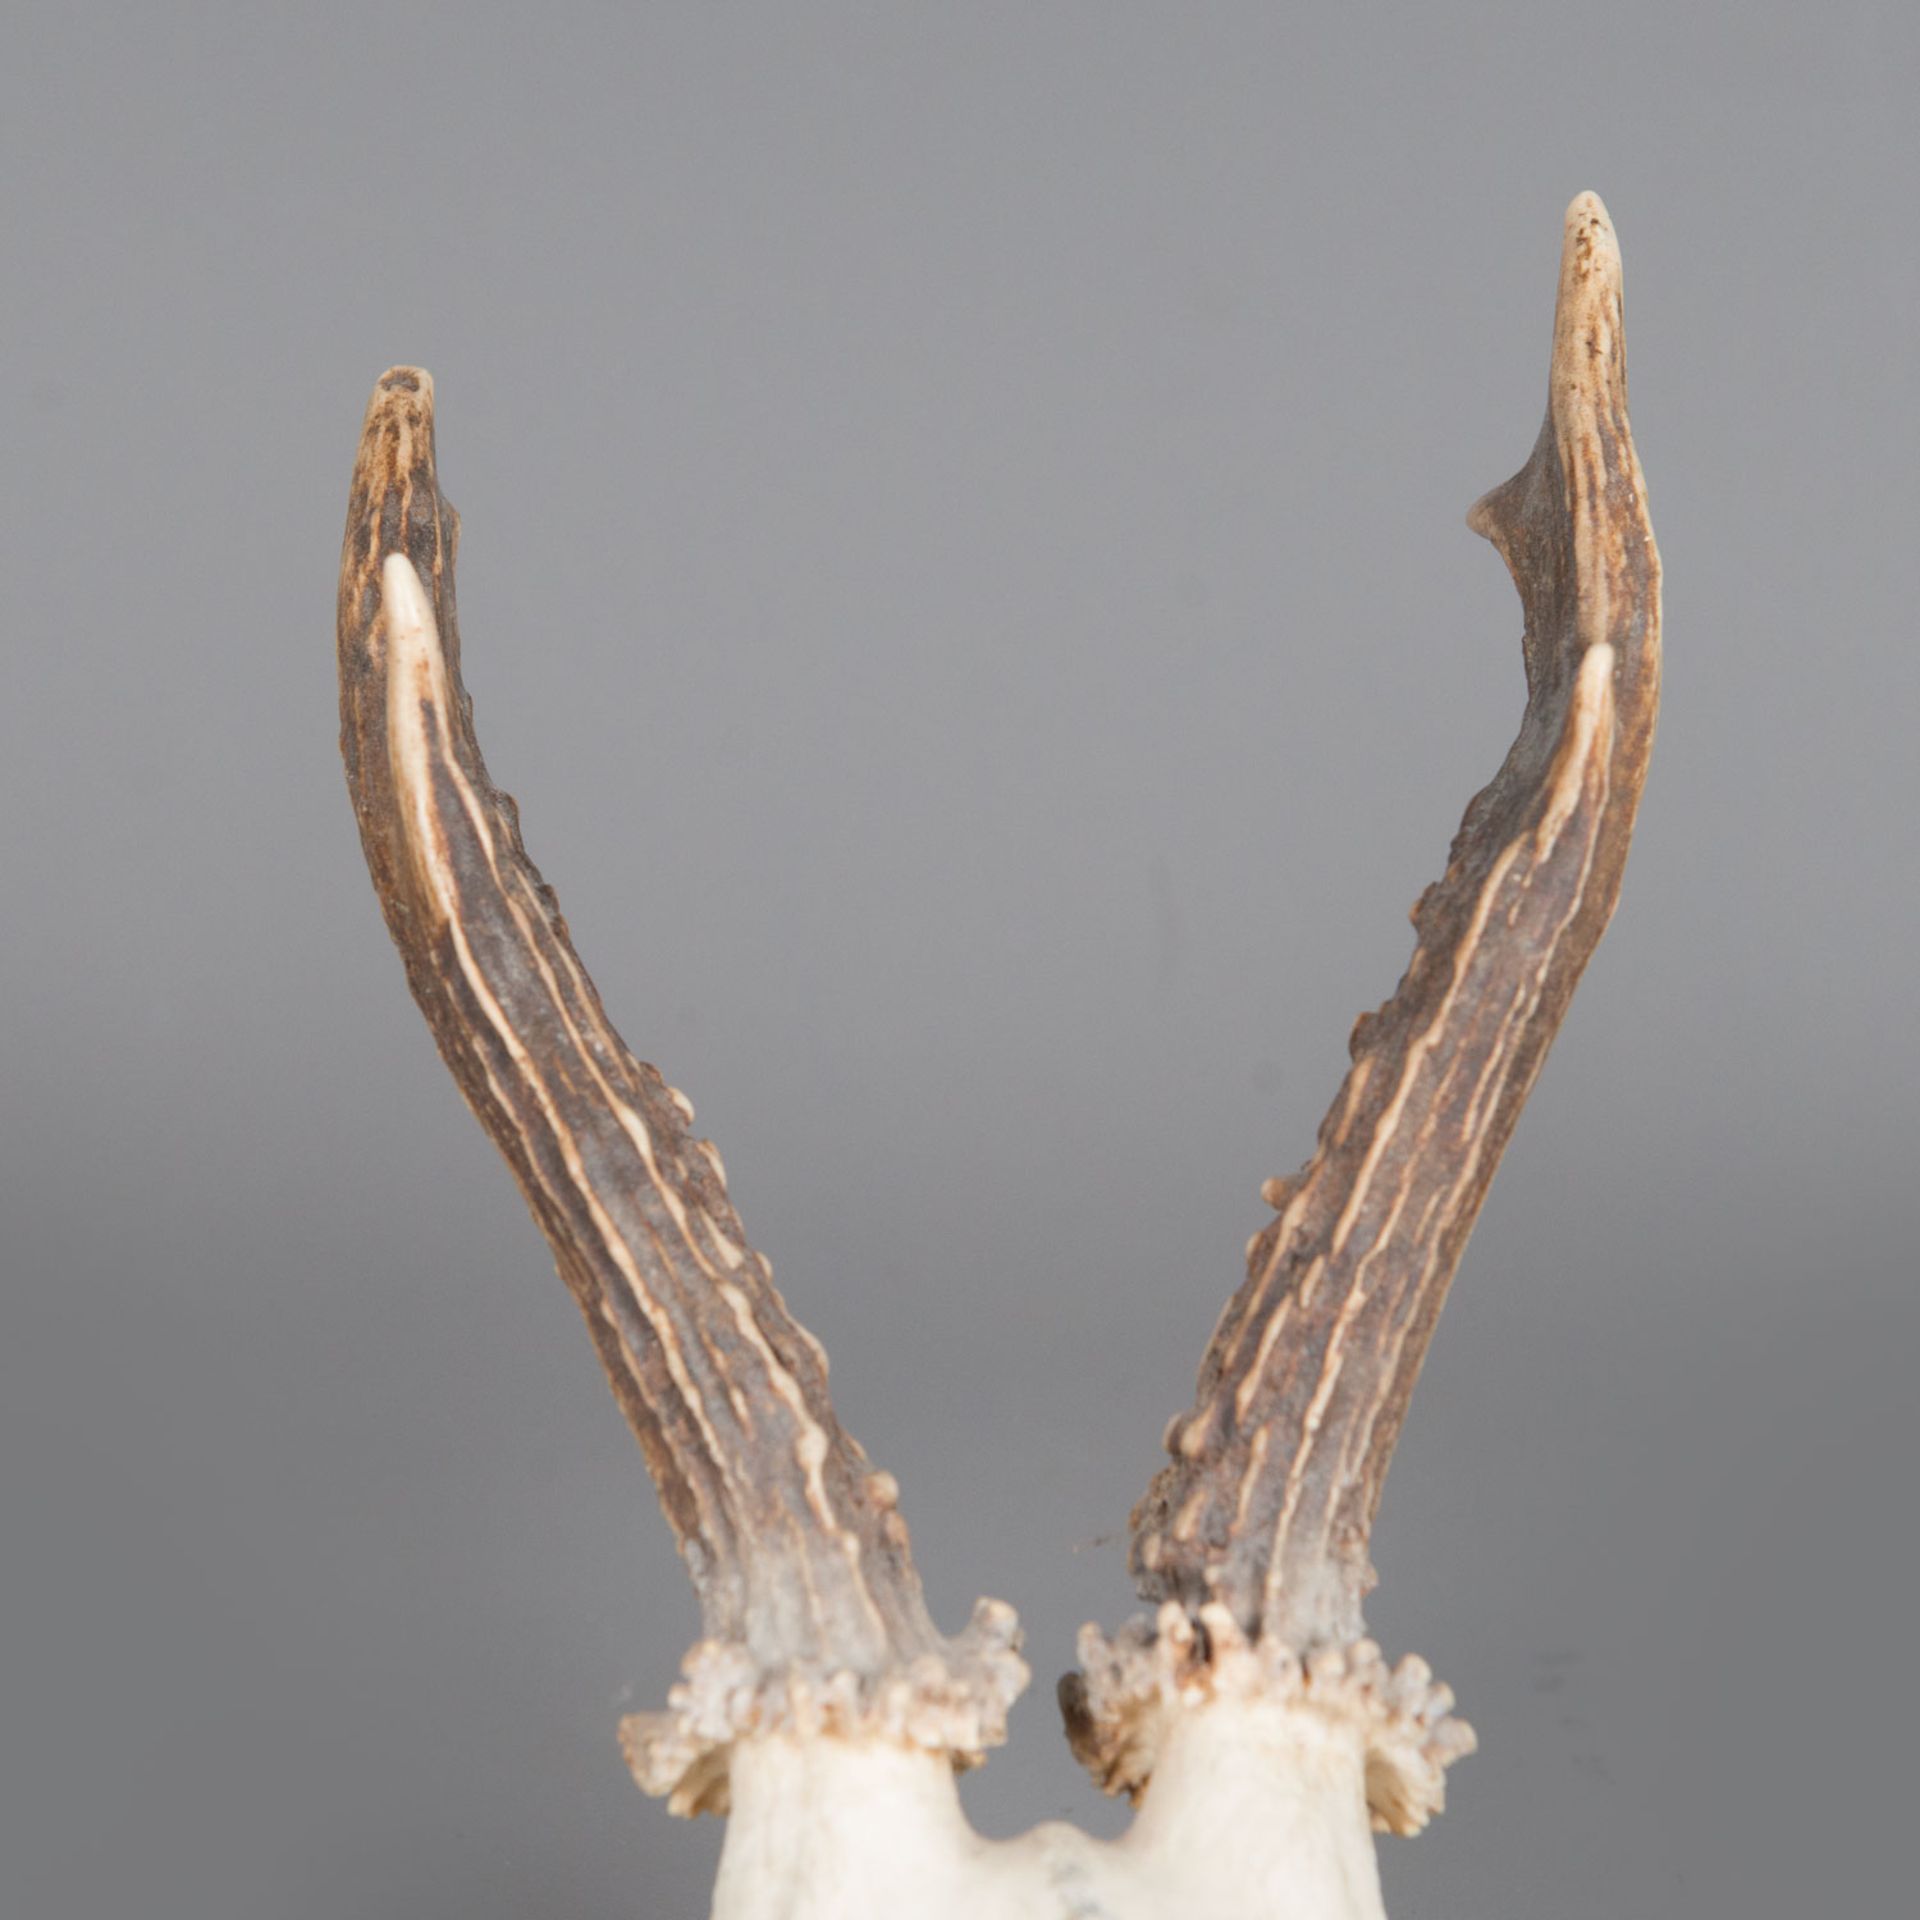 Fawn skull - Image 3 of 3